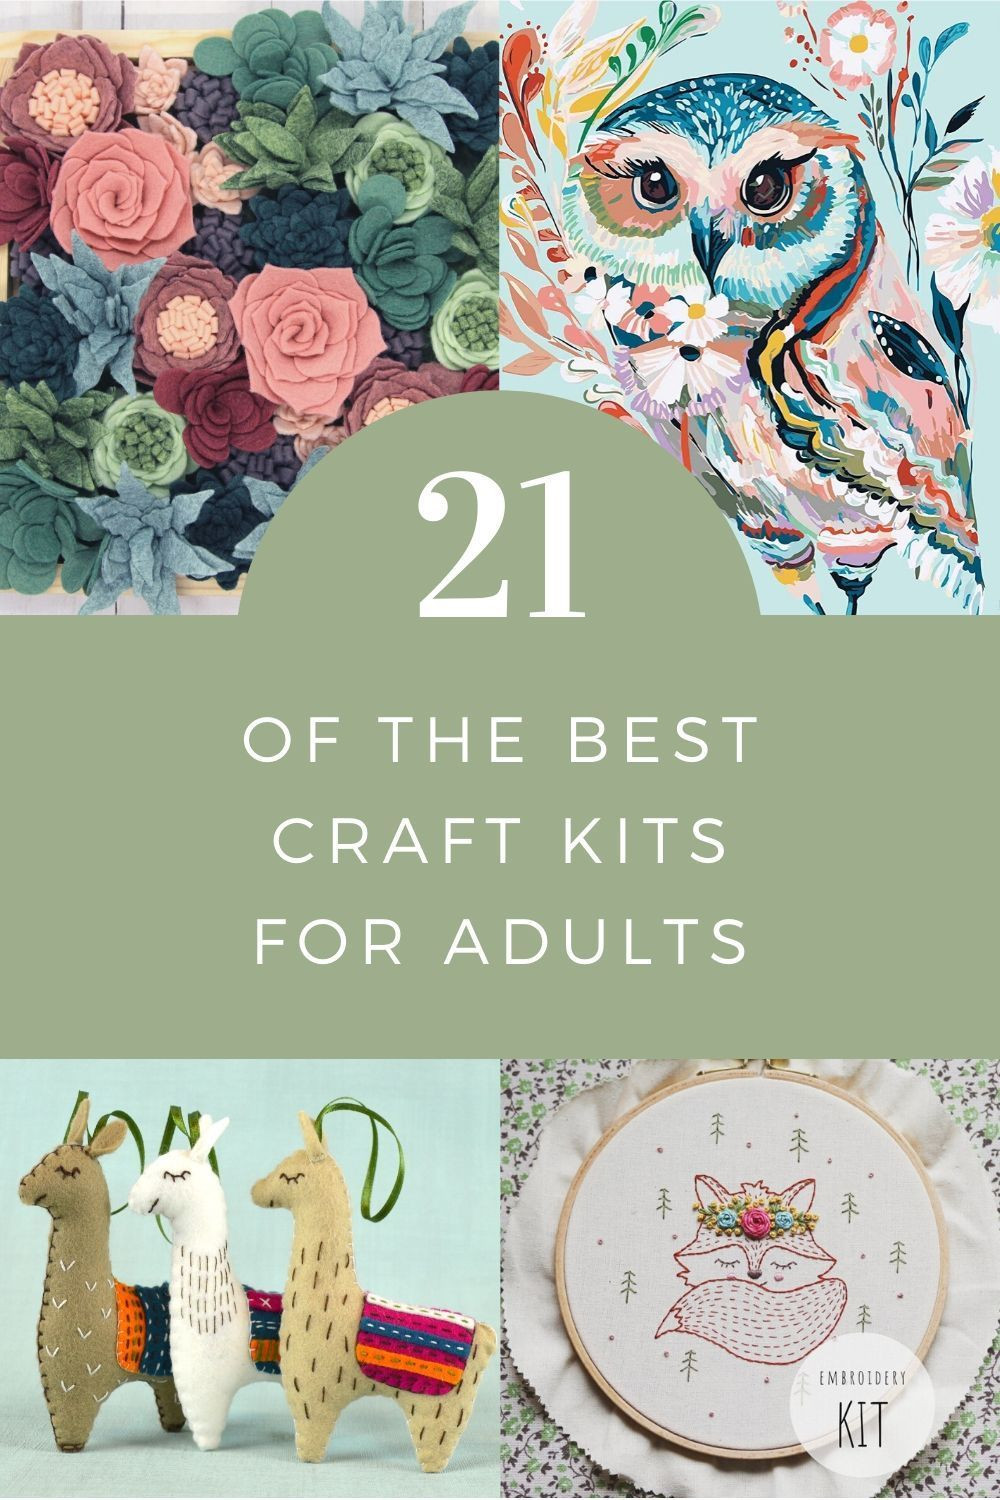 Best Craft Kits For Adults
 21 of the Best Craft Kits for Adults in 2020 With images